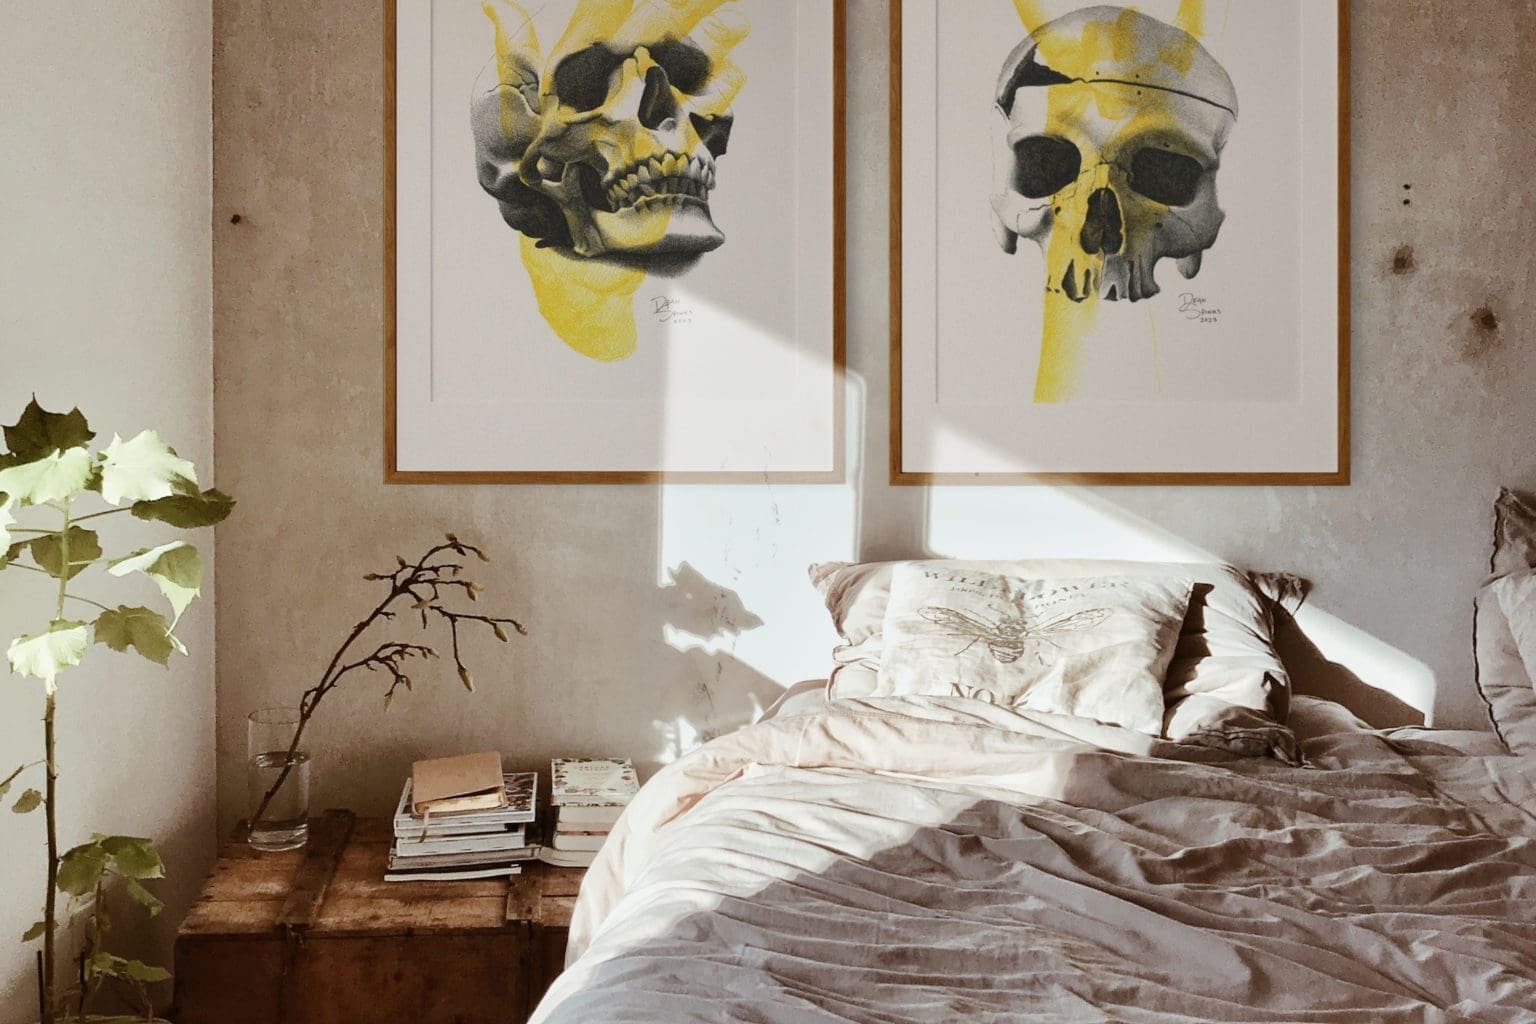 skulls and hands drawing on a wall